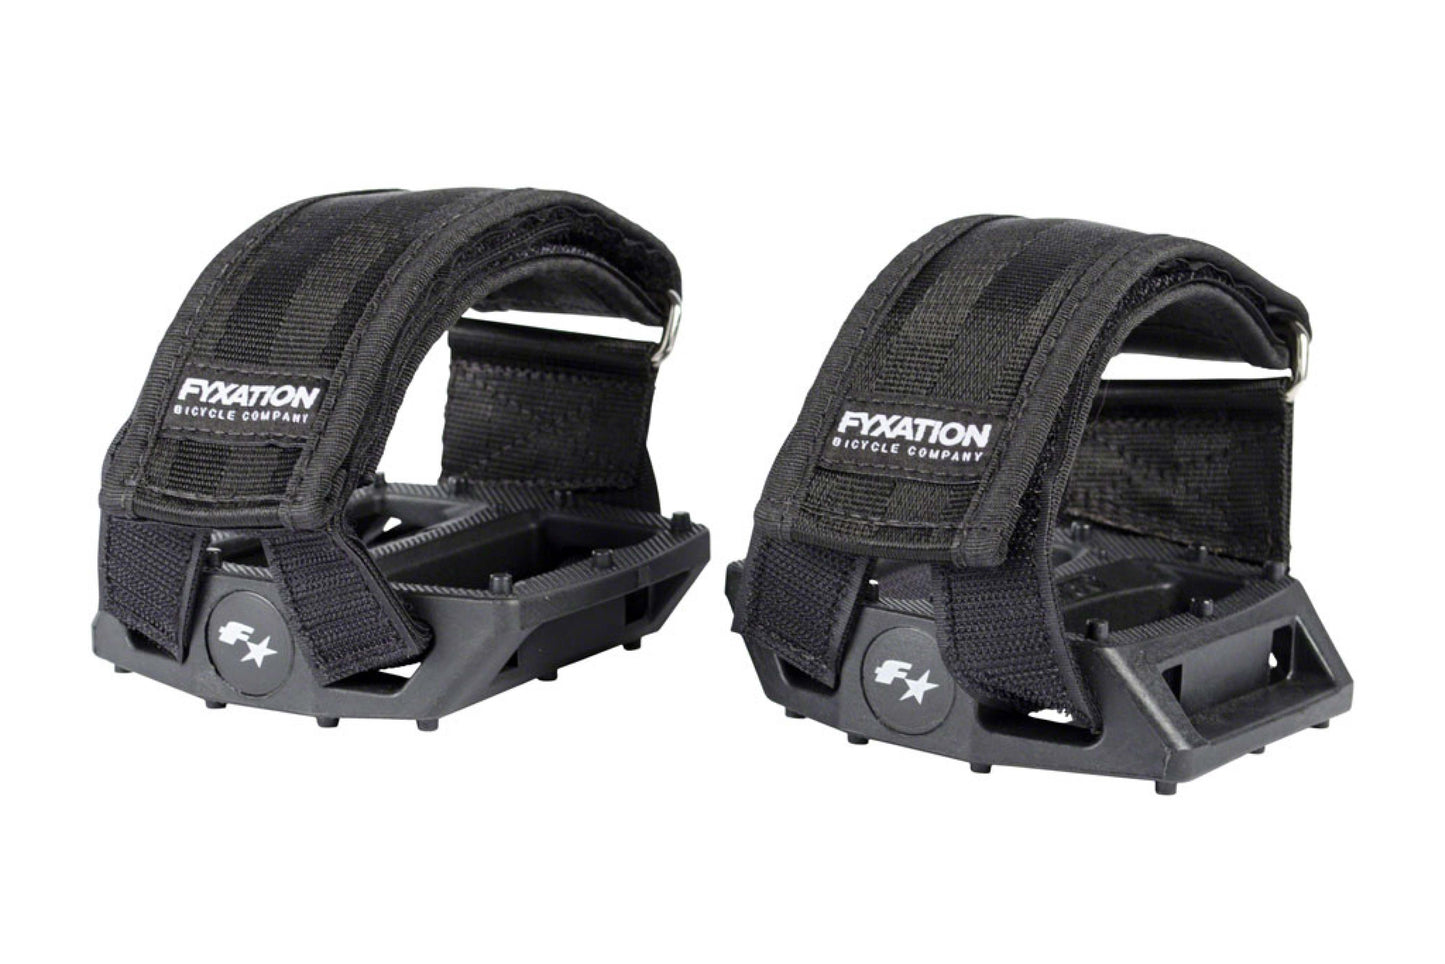 FYXATION Gates Pedals and Strap Kit